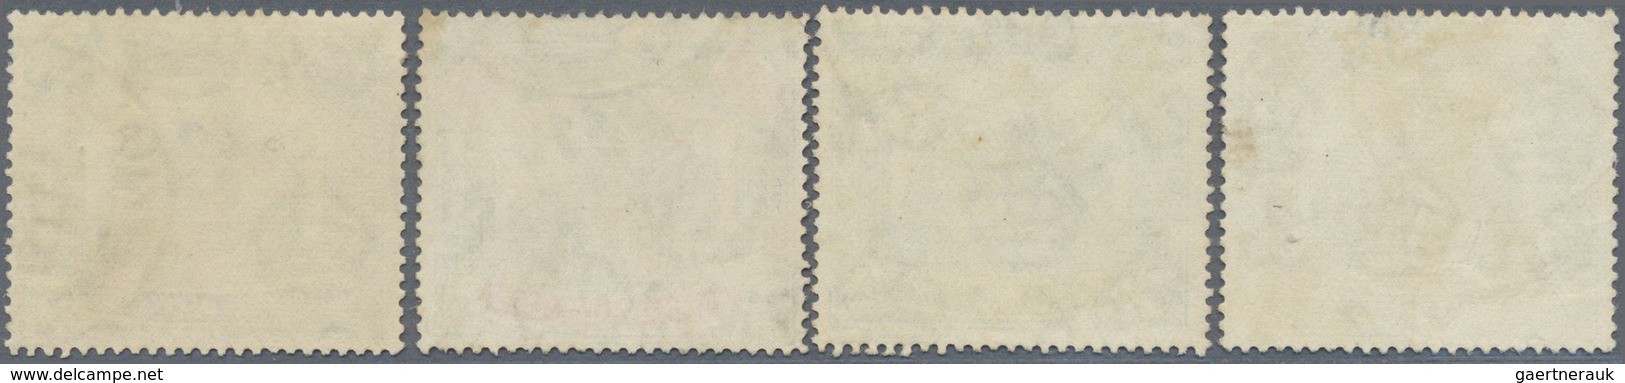 O Malaiischer Staatenbund: 1925/1926, Elephant Definitives With Wmk. Mult. Script CA $1 (two Shades) T - Federated Malay States